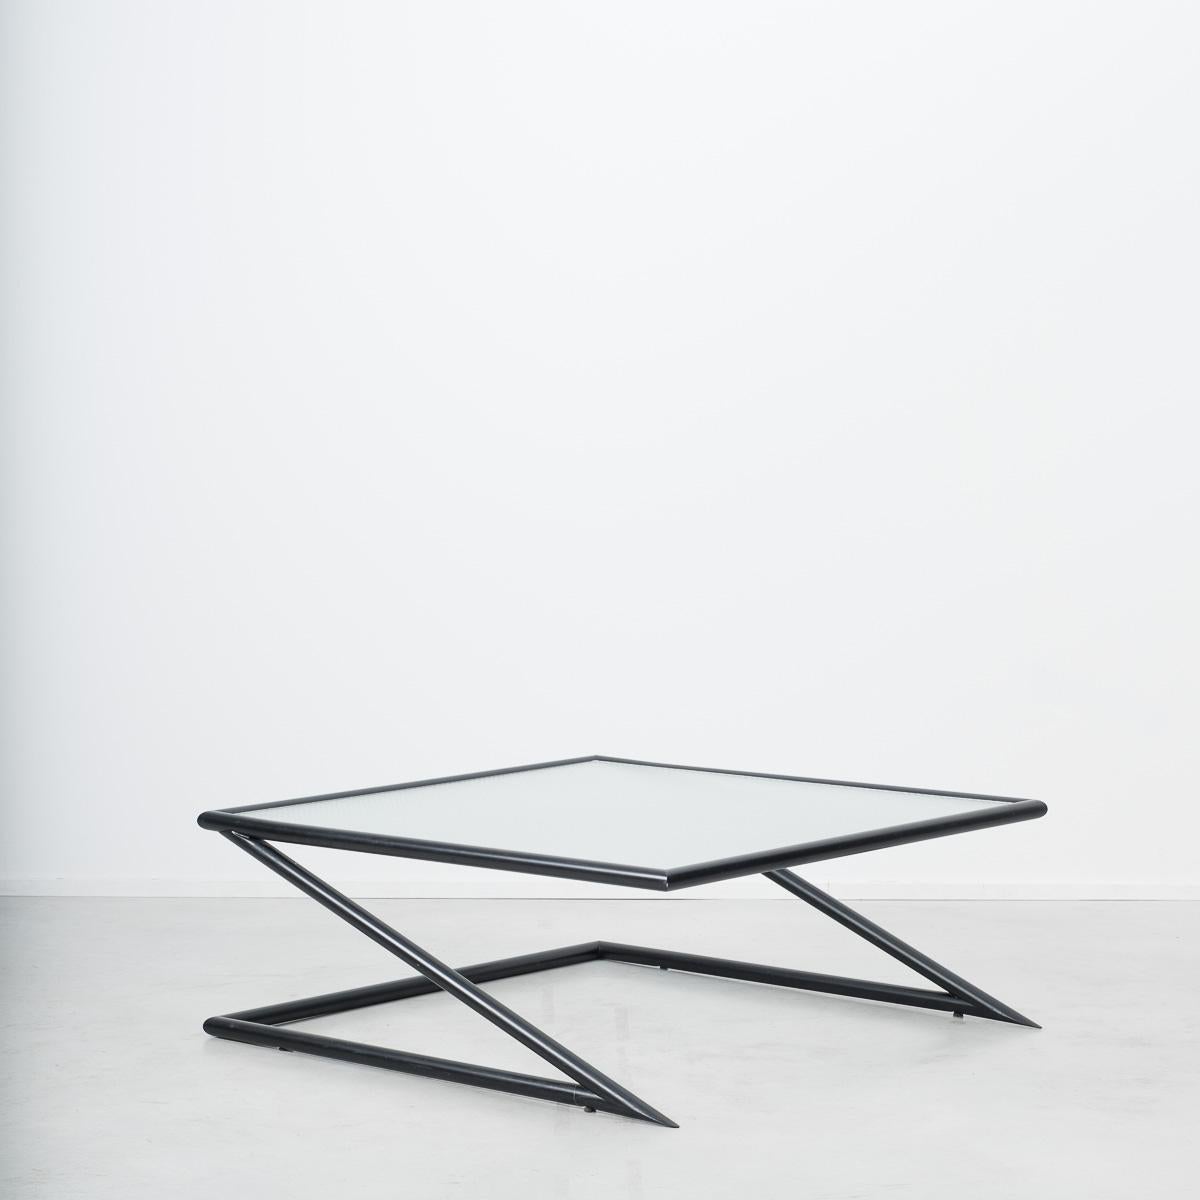 A pair of architectural tables manufactured by Dutch company Harvink in the mid-1980s. The gravity defying Z-design has a strong sculptural presence. The tables are a versatile size and equally appropriate for either side or coffee tables. The black